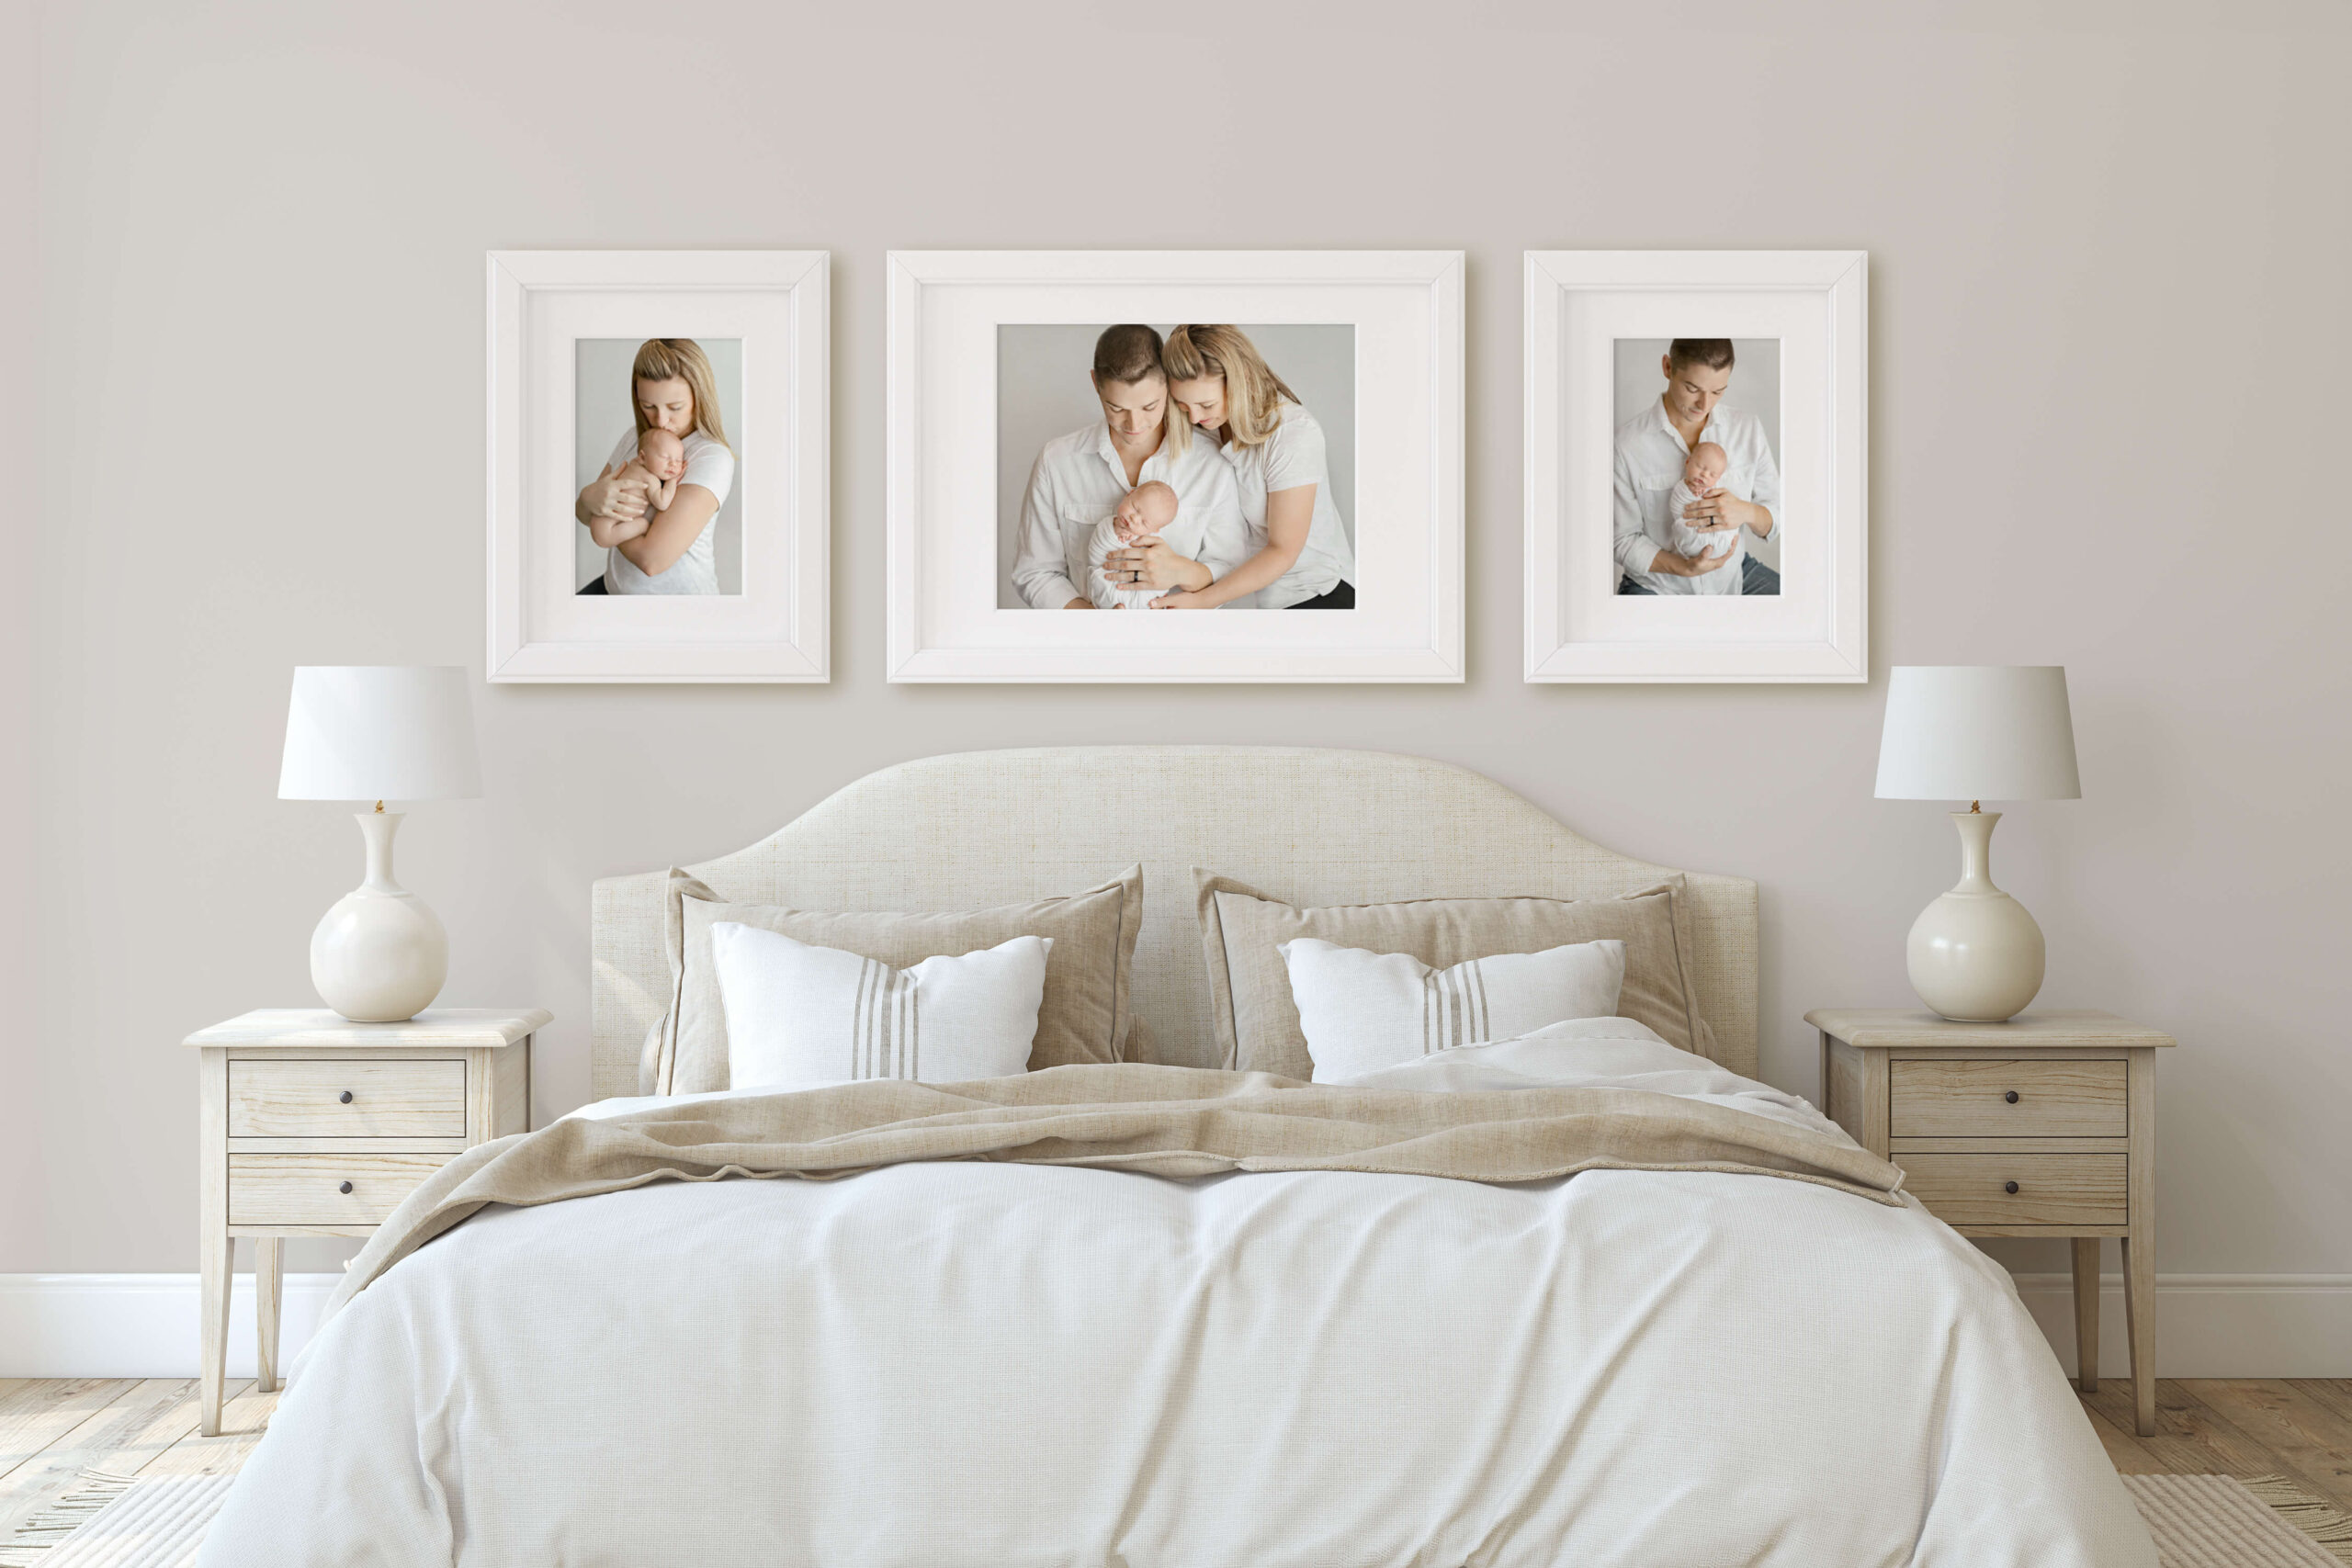 a bedroom with framed printed family photos on the walls from a print photography studio newborn photography packages